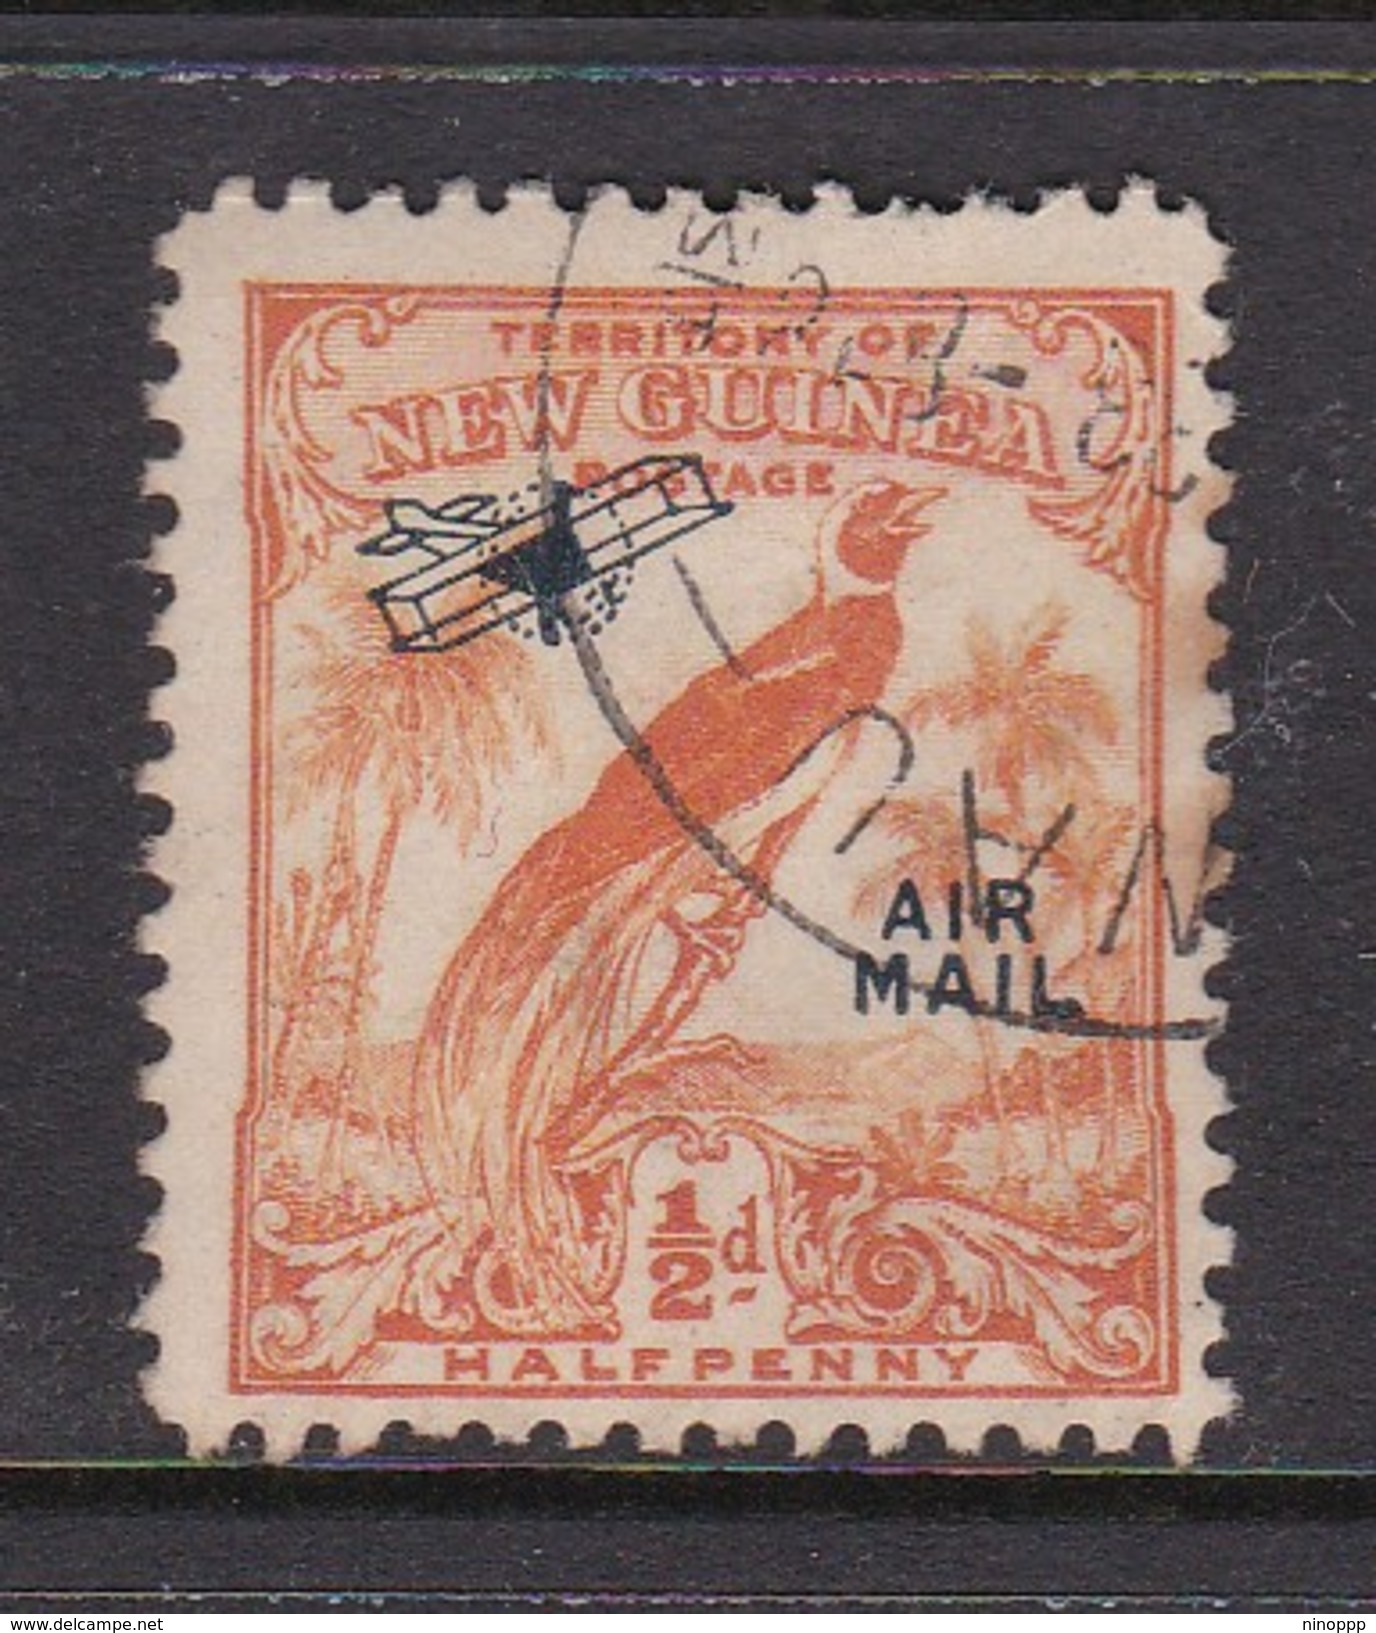 New Guinea SG 190 1932 Raggiana Bird No Date Air Mail Half Penny Orange Used - Papouasie-Nouvelle-Guinée